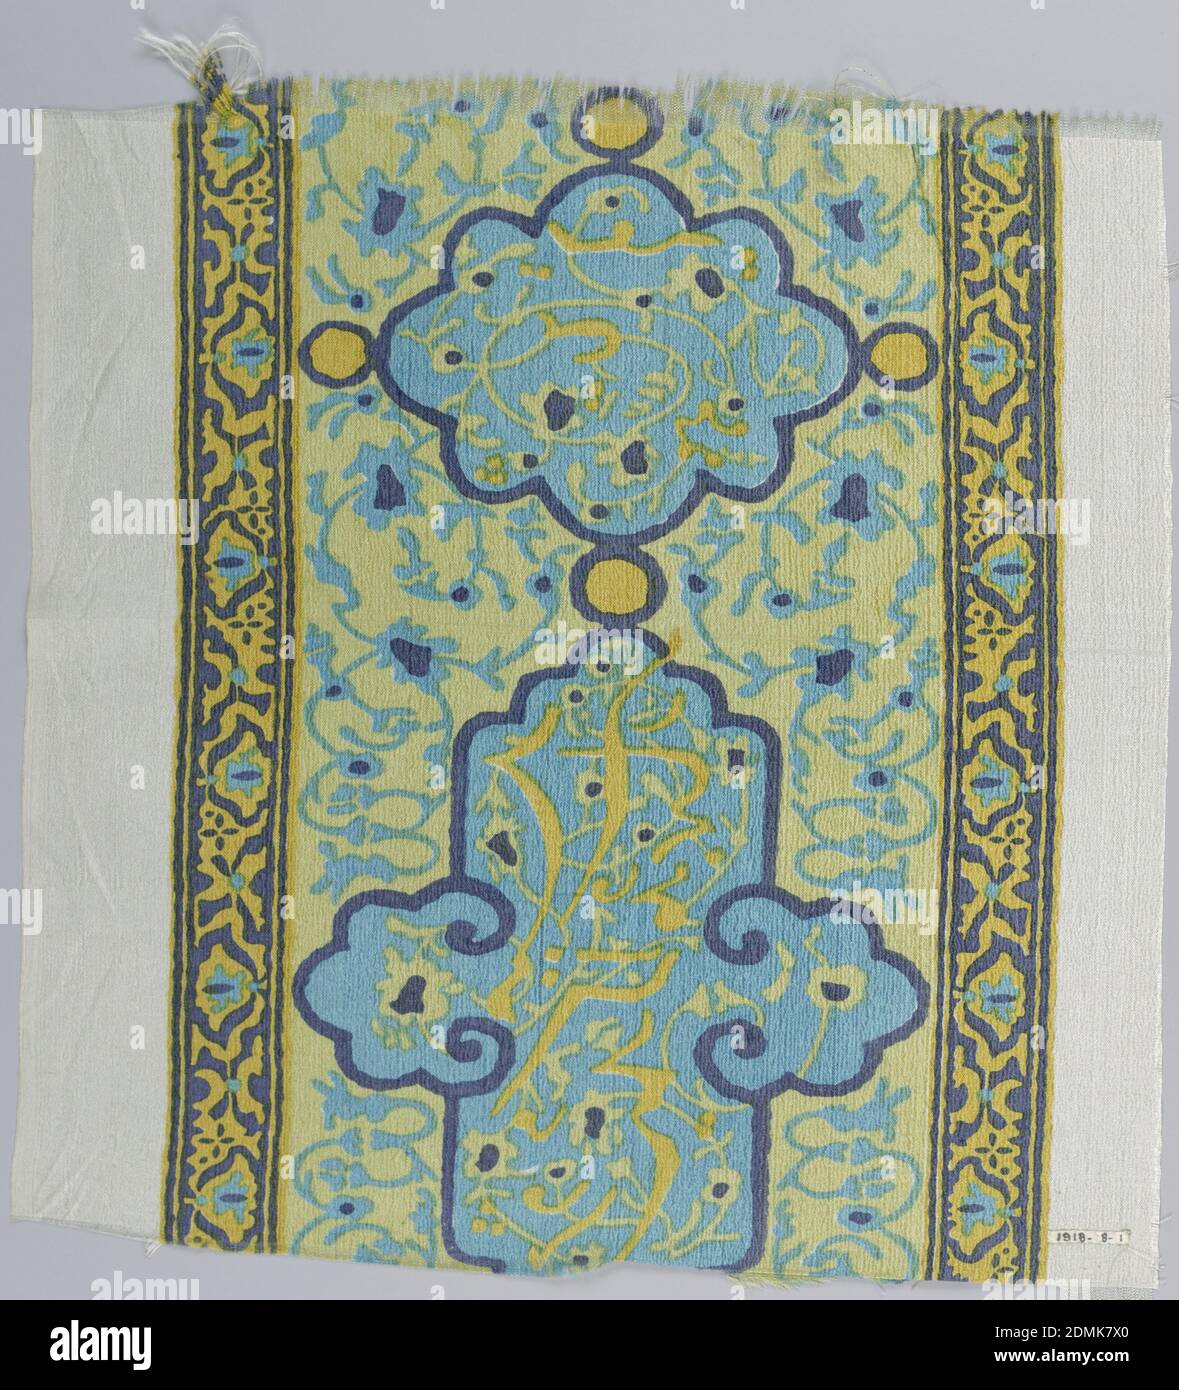 Fragment, Duplan Silk Corporation, (Hazleton, Pennsylvania, USA), Medium: silk Technique: printed by engraved roller on plain weave, Dress-weight silk fabric with a border design of floral and calligraphic motifs, in the style of Hispano-Arabic tile. Printed in dark blue, turquoise, and two yellows on an off-white ground., 1914–1918, printed, dyed & painted textiles, Fragment Stock Photo